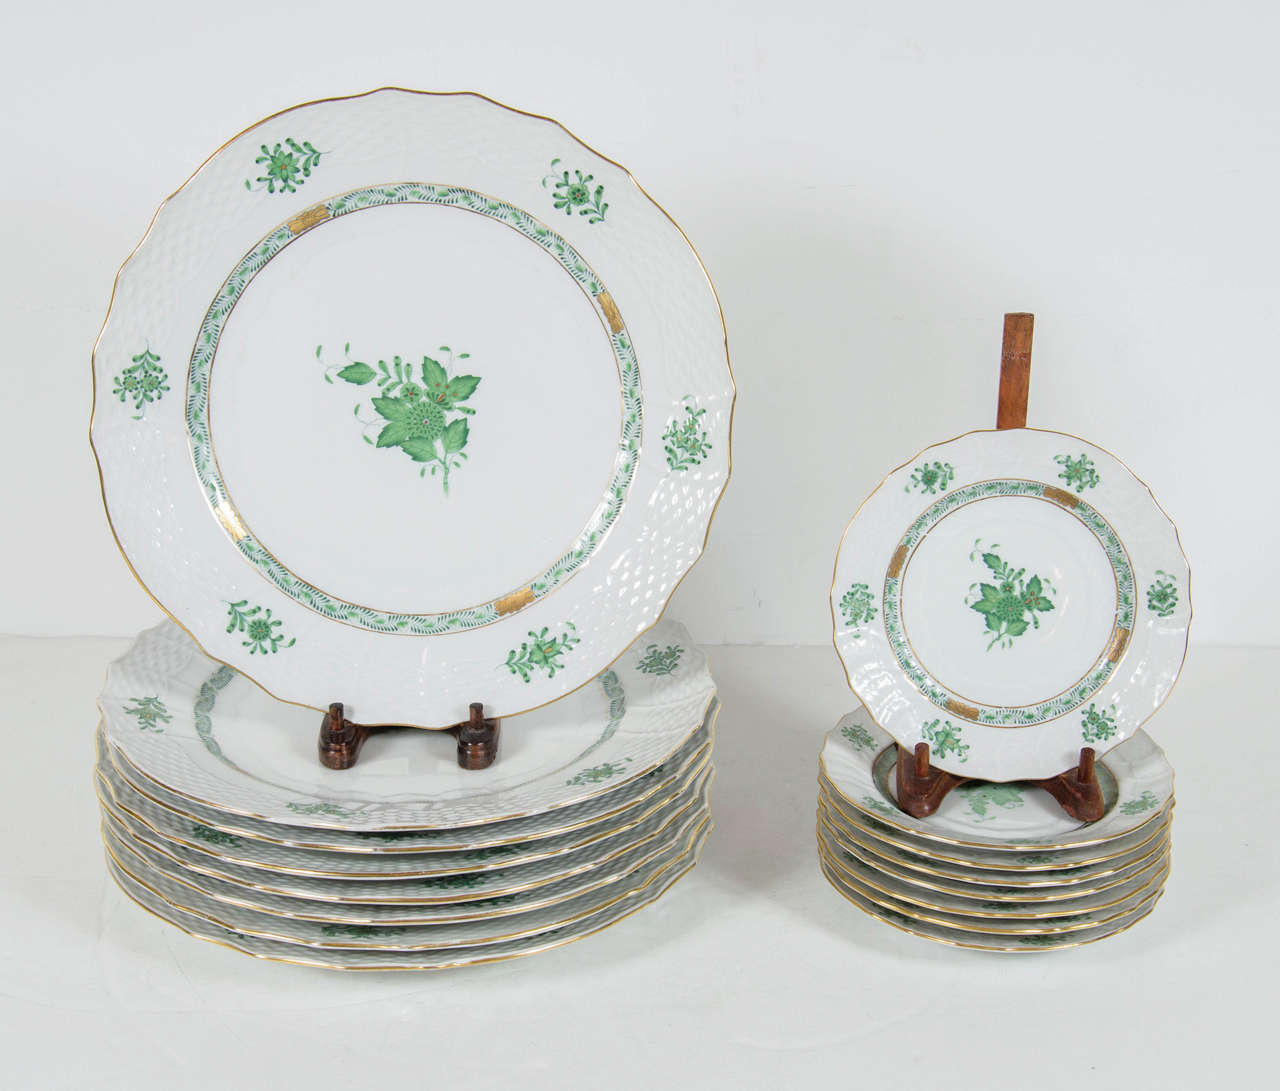 These sets of 8 platers feature a white glazed porcelain with green polychromed and gilt floral decoration by Herend.They are hand painted by the renown Hungarian firm Herend. They are adorned overall with delicate floral stems in a pale green. They